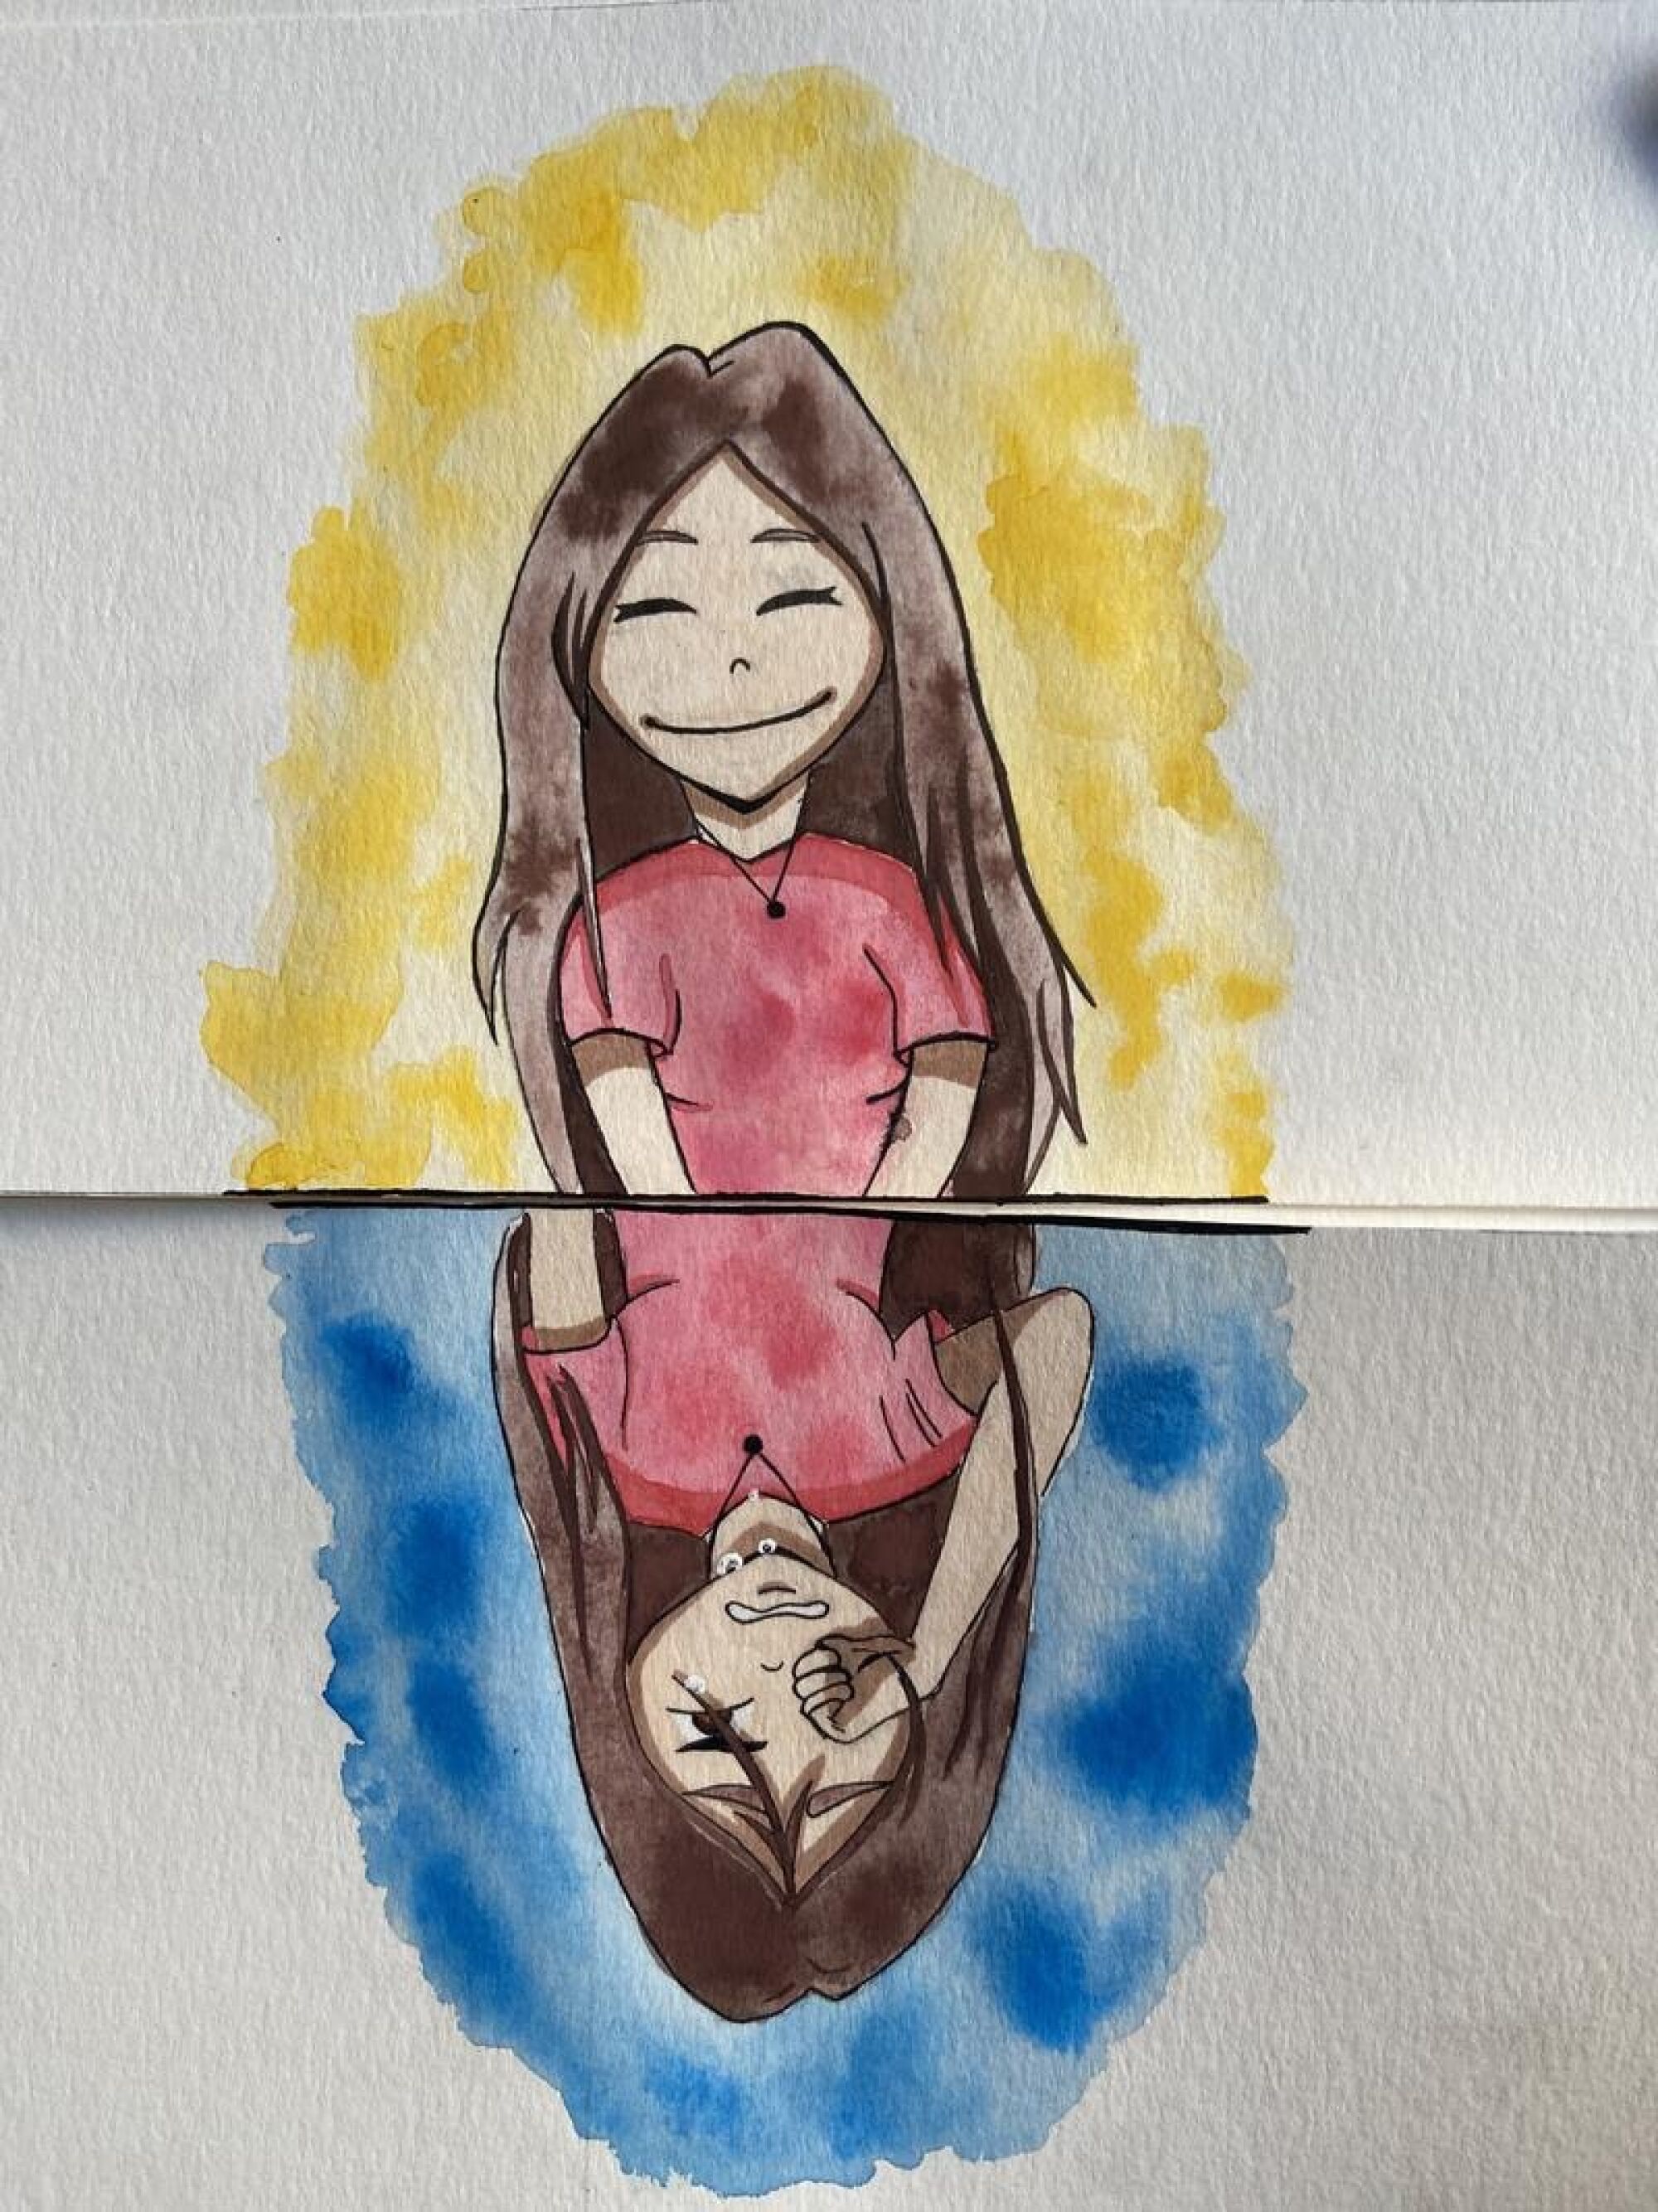 A drawing of a smiling girl with a crying girl reflected underneath